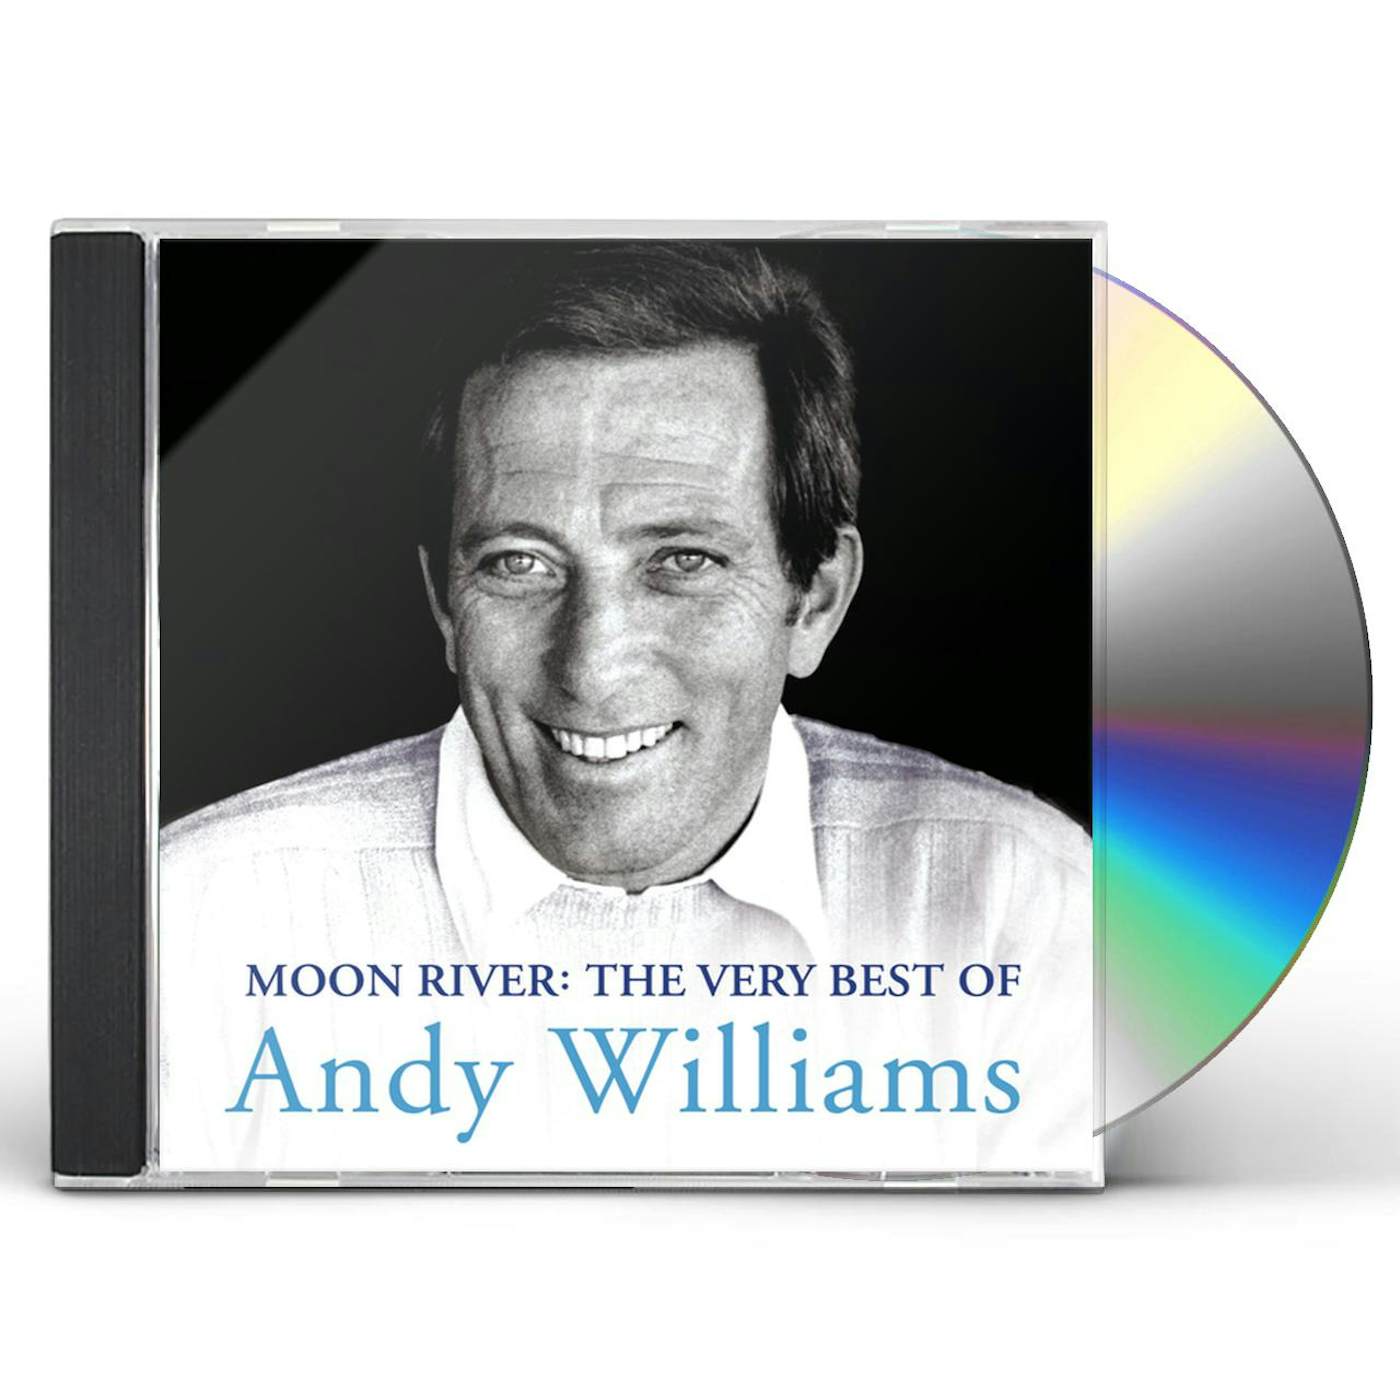 MOON RIVER: THE VERY BEST OF ANDY WILLIAMS CD